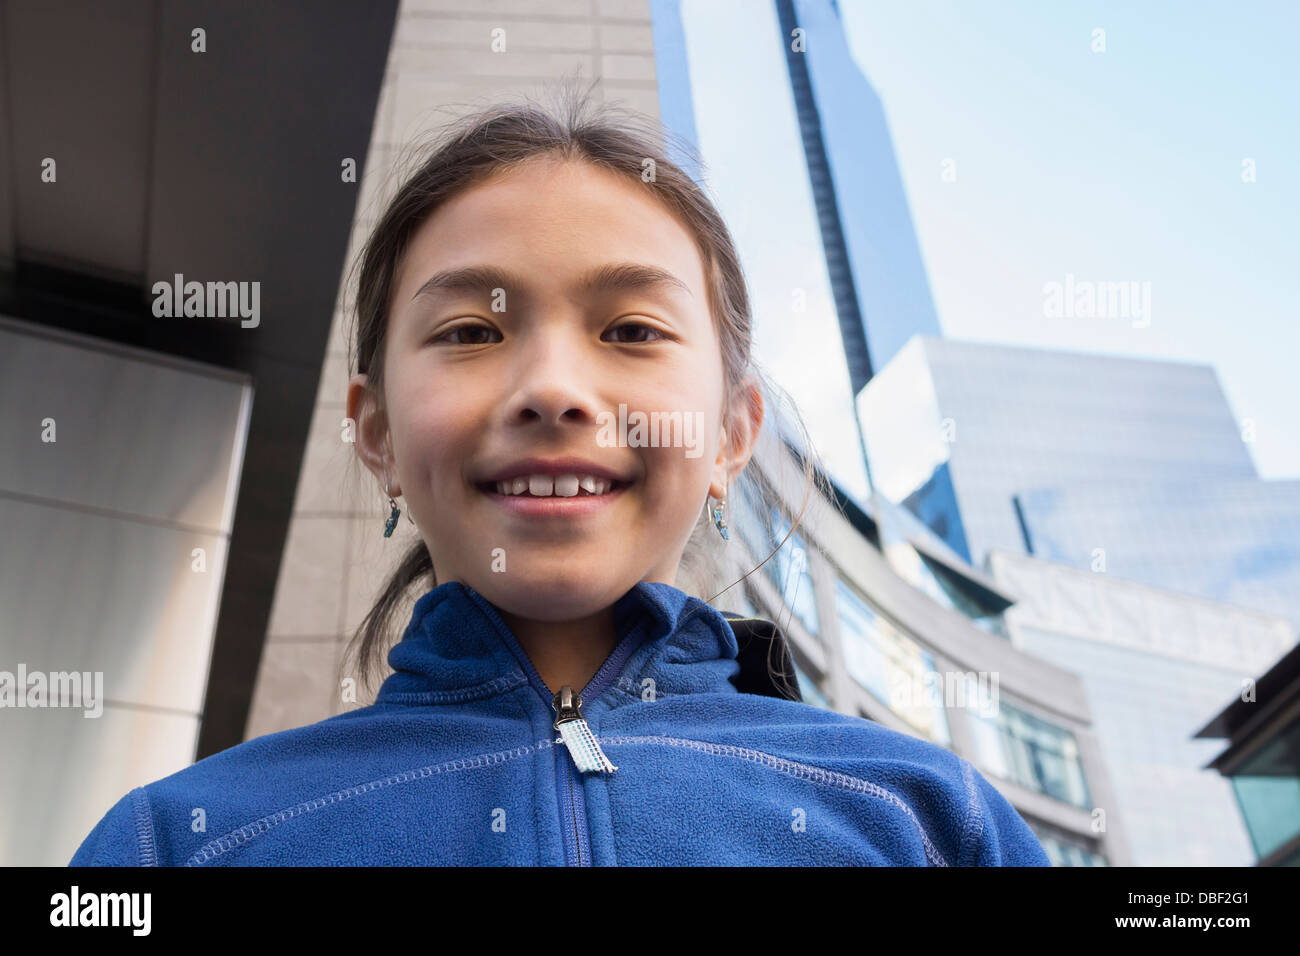 Mixed race girl smiling on city street Stock Photo